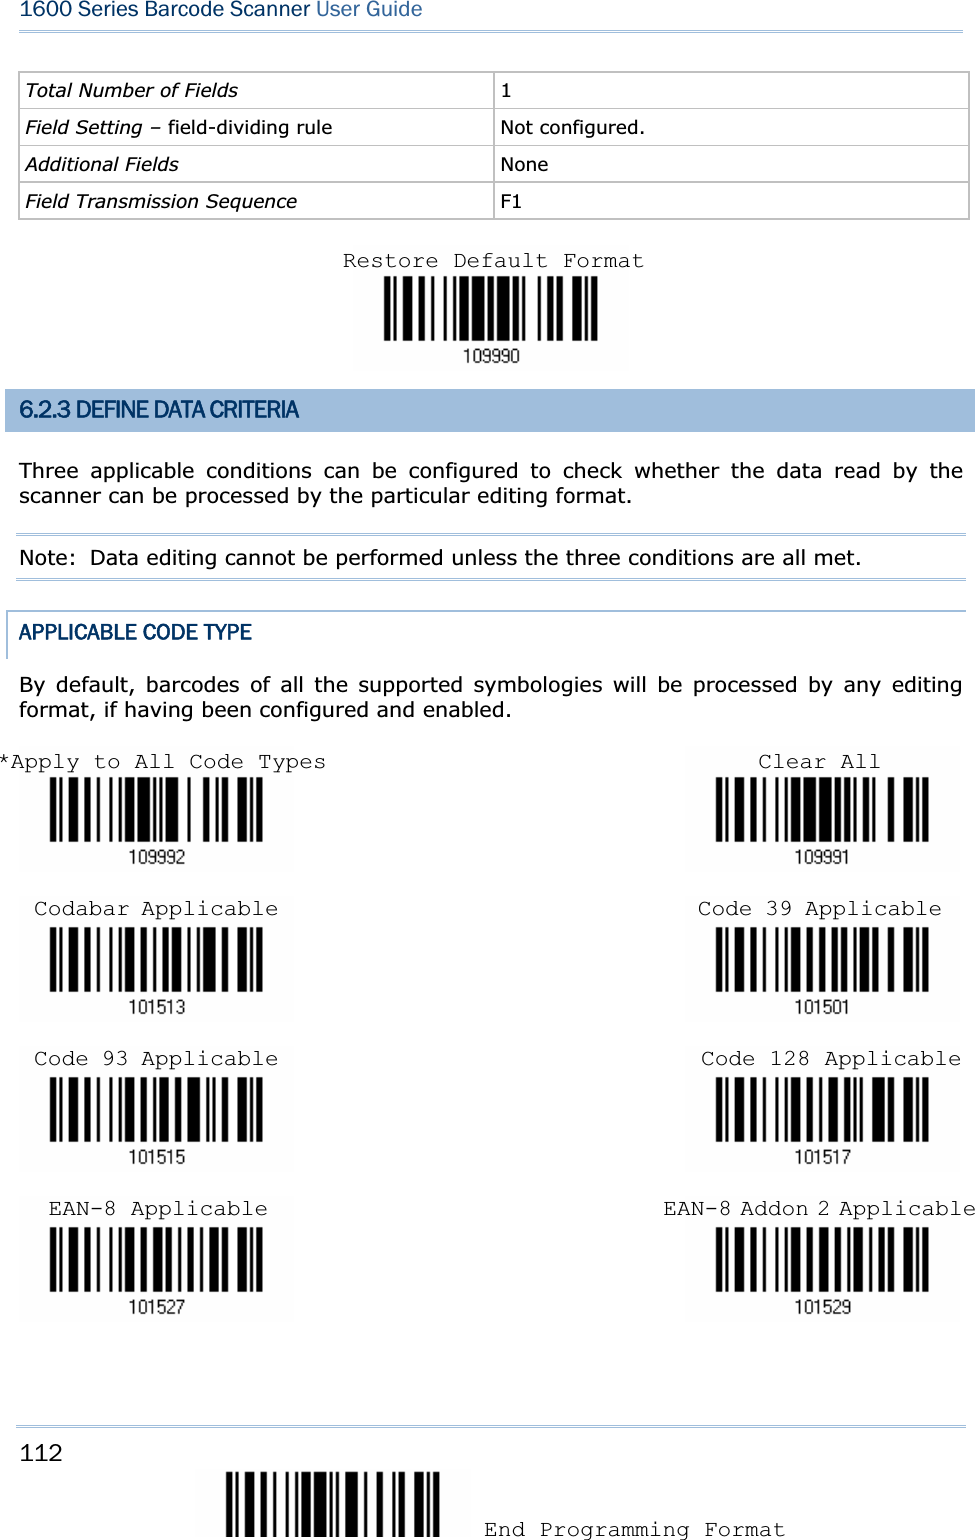 112 End Programming Format 1600 Series Barcode Scanner User GuideTotal Number of Fields  1Field Setting – field-dividing rule Not configured. Additional Fields  NoneField Transmission Sequence  F16.2.3 DEFINE DATA CRITERIA Three applicable conditions can be configured to check whether the data read by the scanner can be processed by the particular editing format.   Note:  Data editing cannot be performed unless the three conditions are all met. APPLICABLE CODE TYPE By default, barcodes of all the supported symbologies will be processed by any editing format, if having been configured and enabled.                                                                                                                                                     Restore Default Format*Apply to All Code Types Codabar Applicable Code 39 ApplicableCode 93 Applicable  Code 128 ApplicableEAN-8 Applicable  EAN-8 Addon 2 ApplicableClear All 